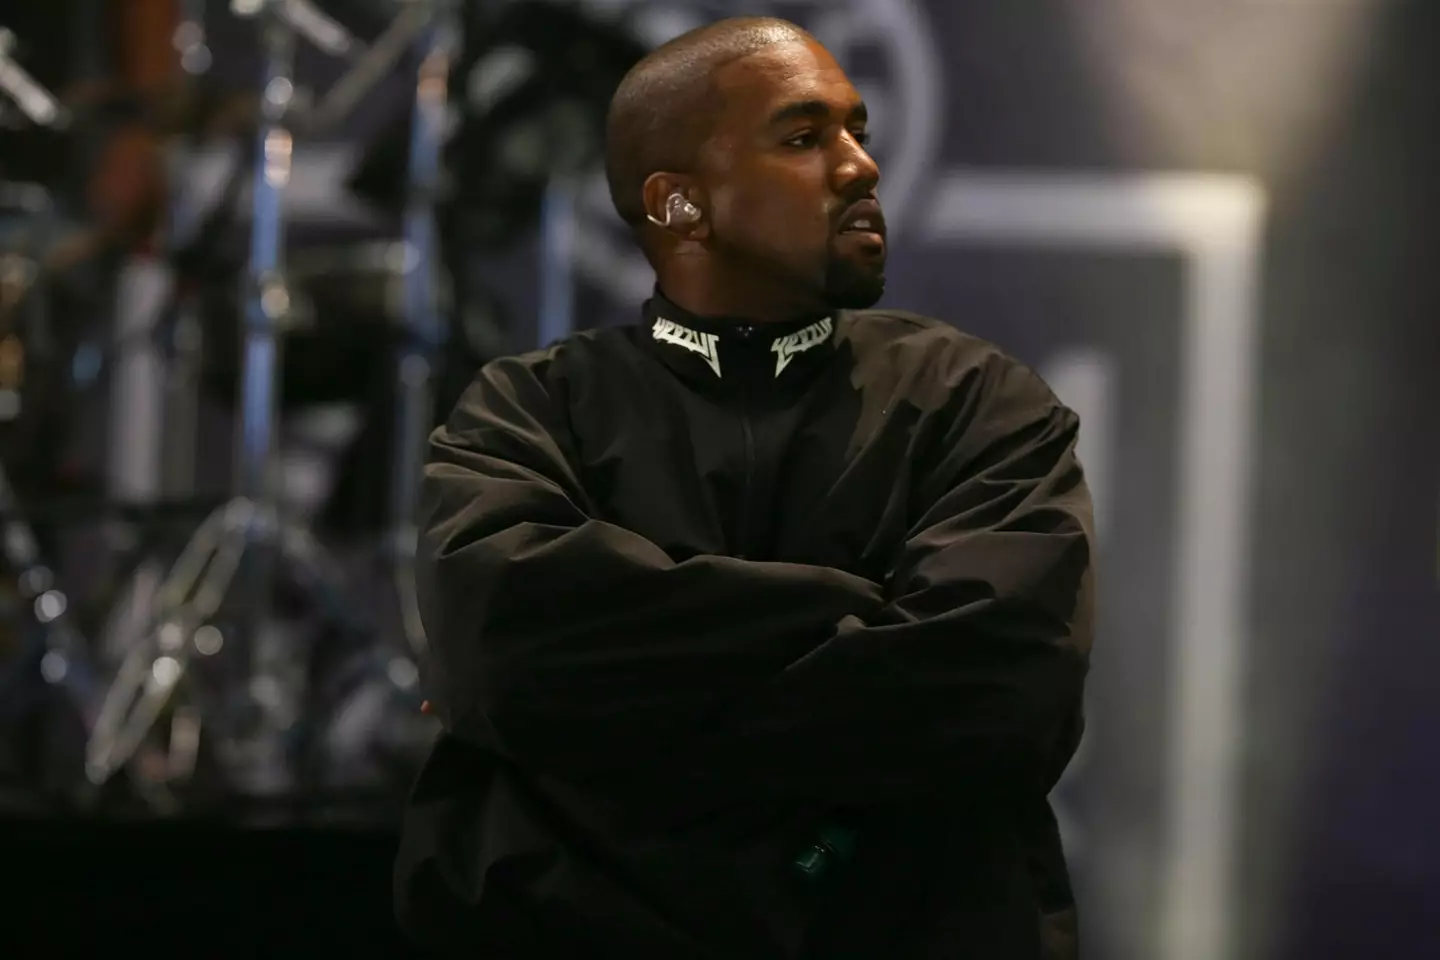 Kanye West is facing a backlash following numerous controversial and racist statements.